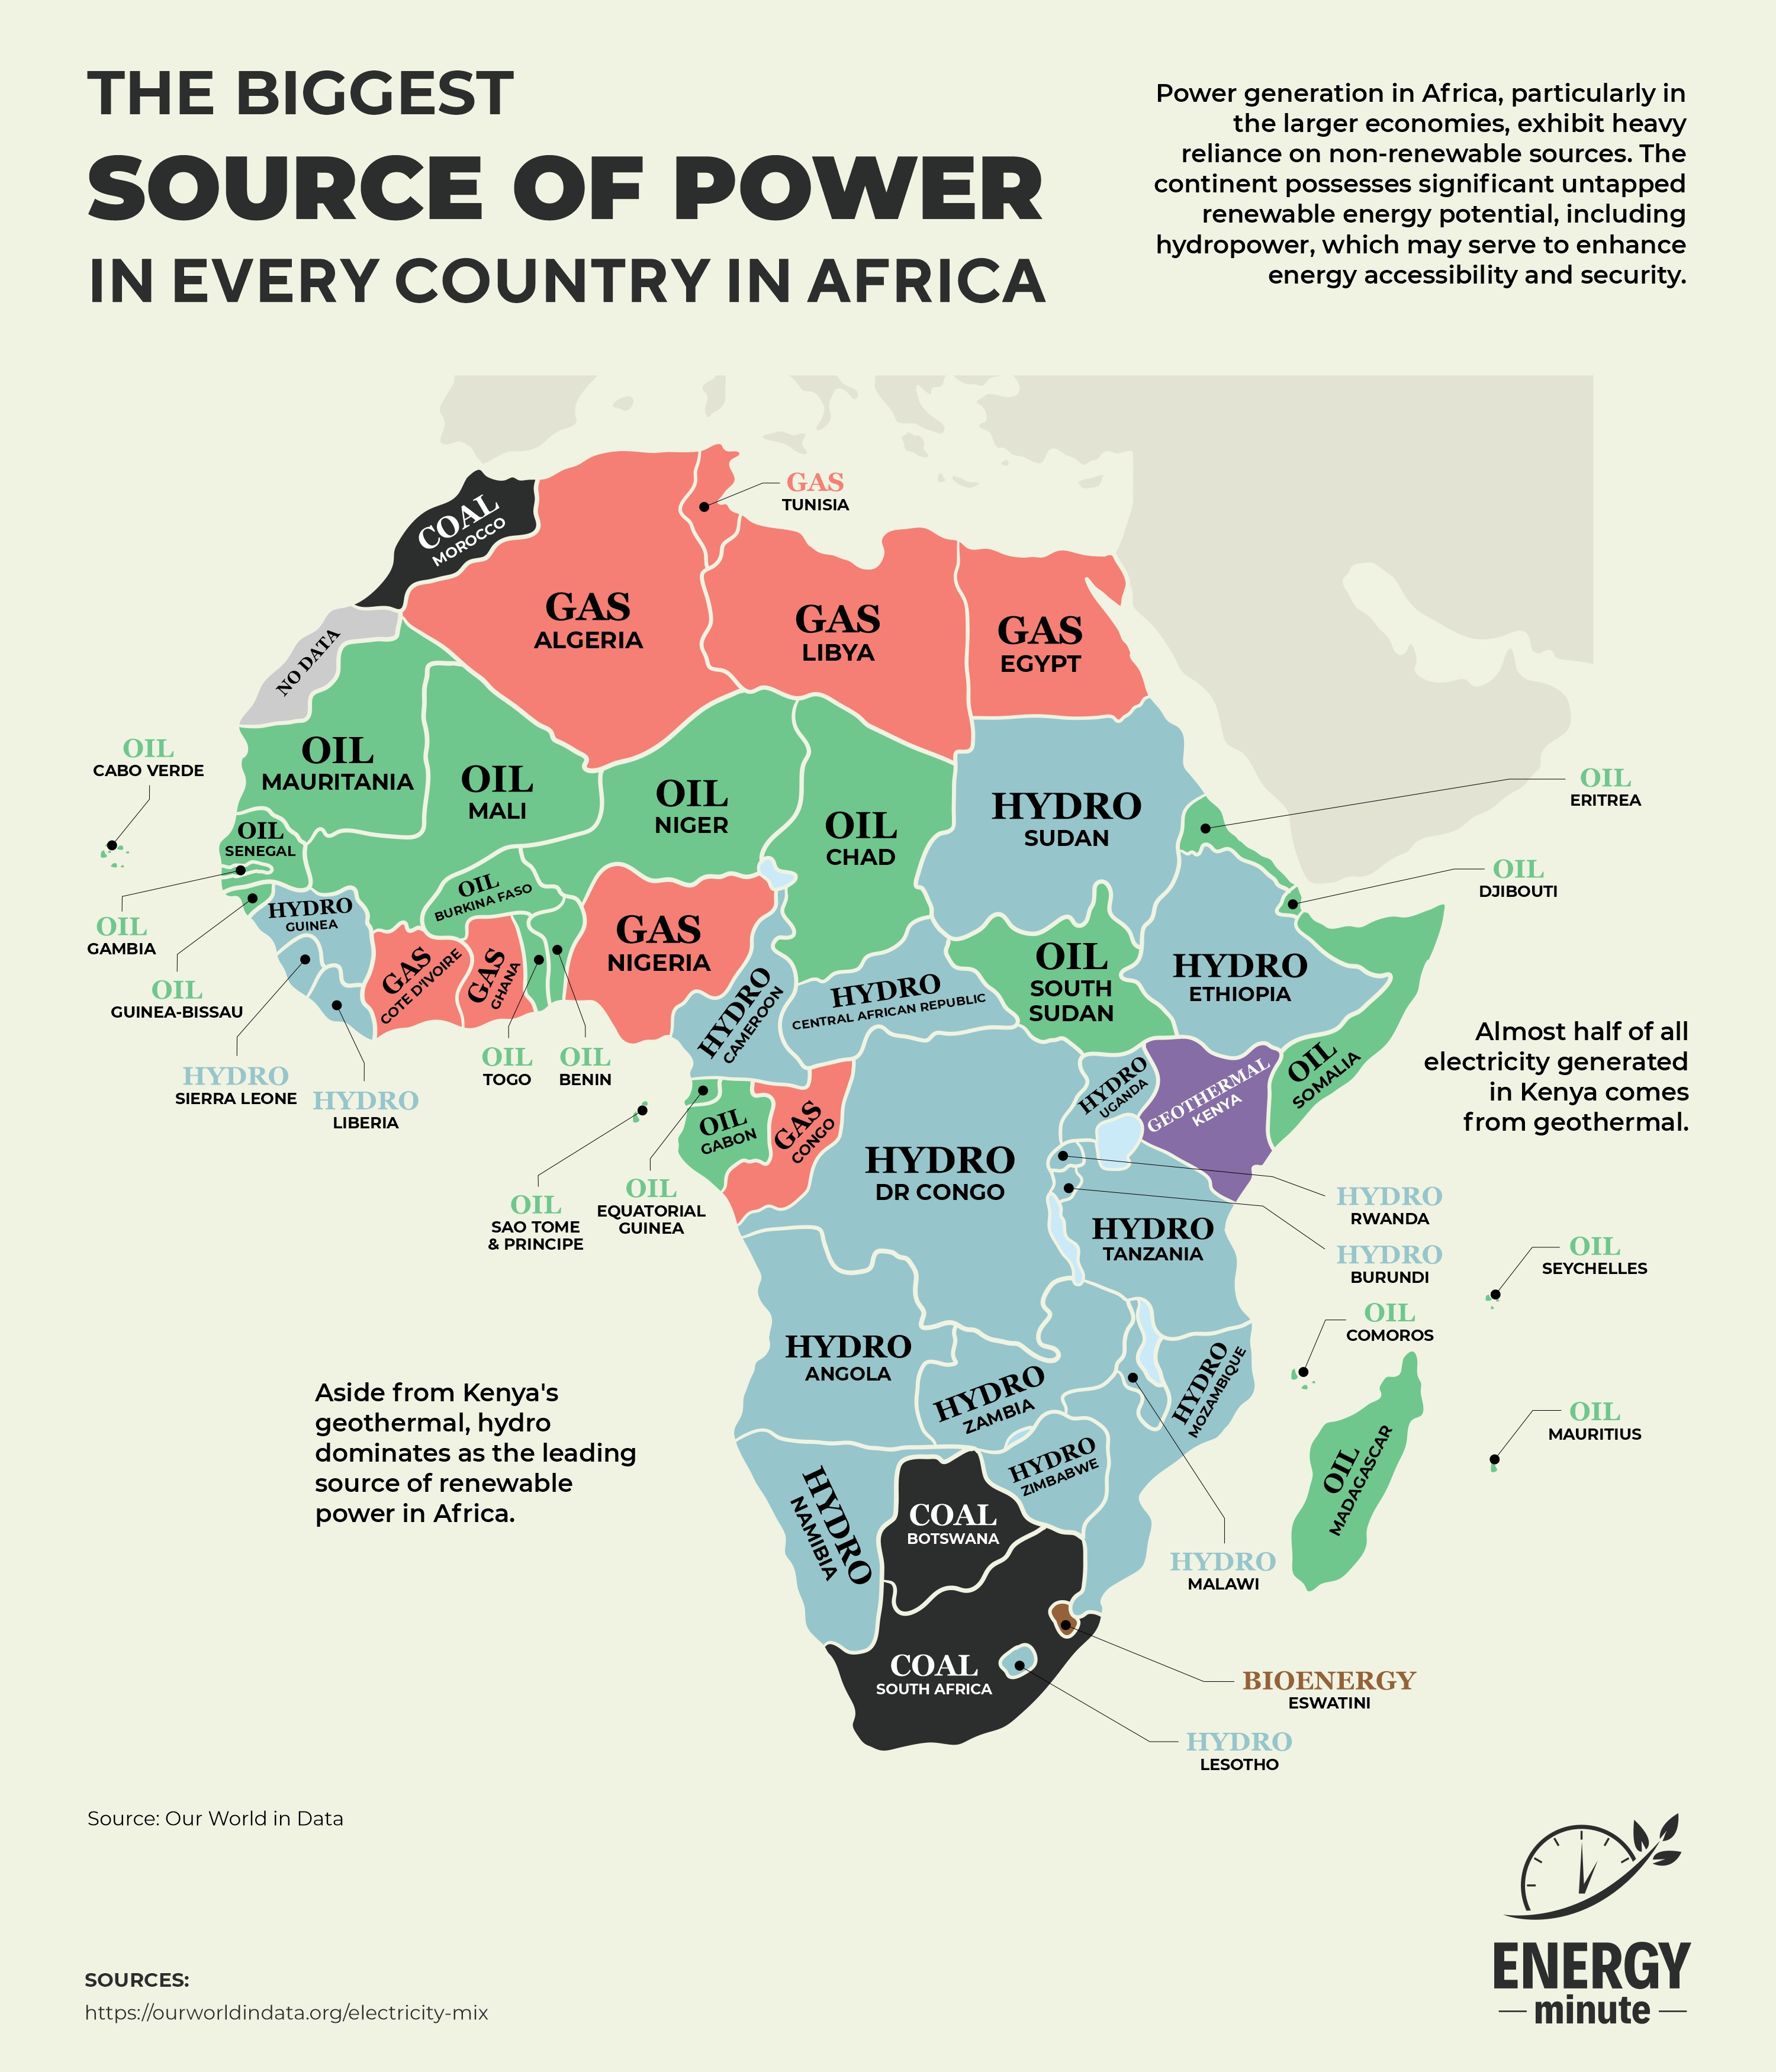 Africa: The Top Sources of Electricity